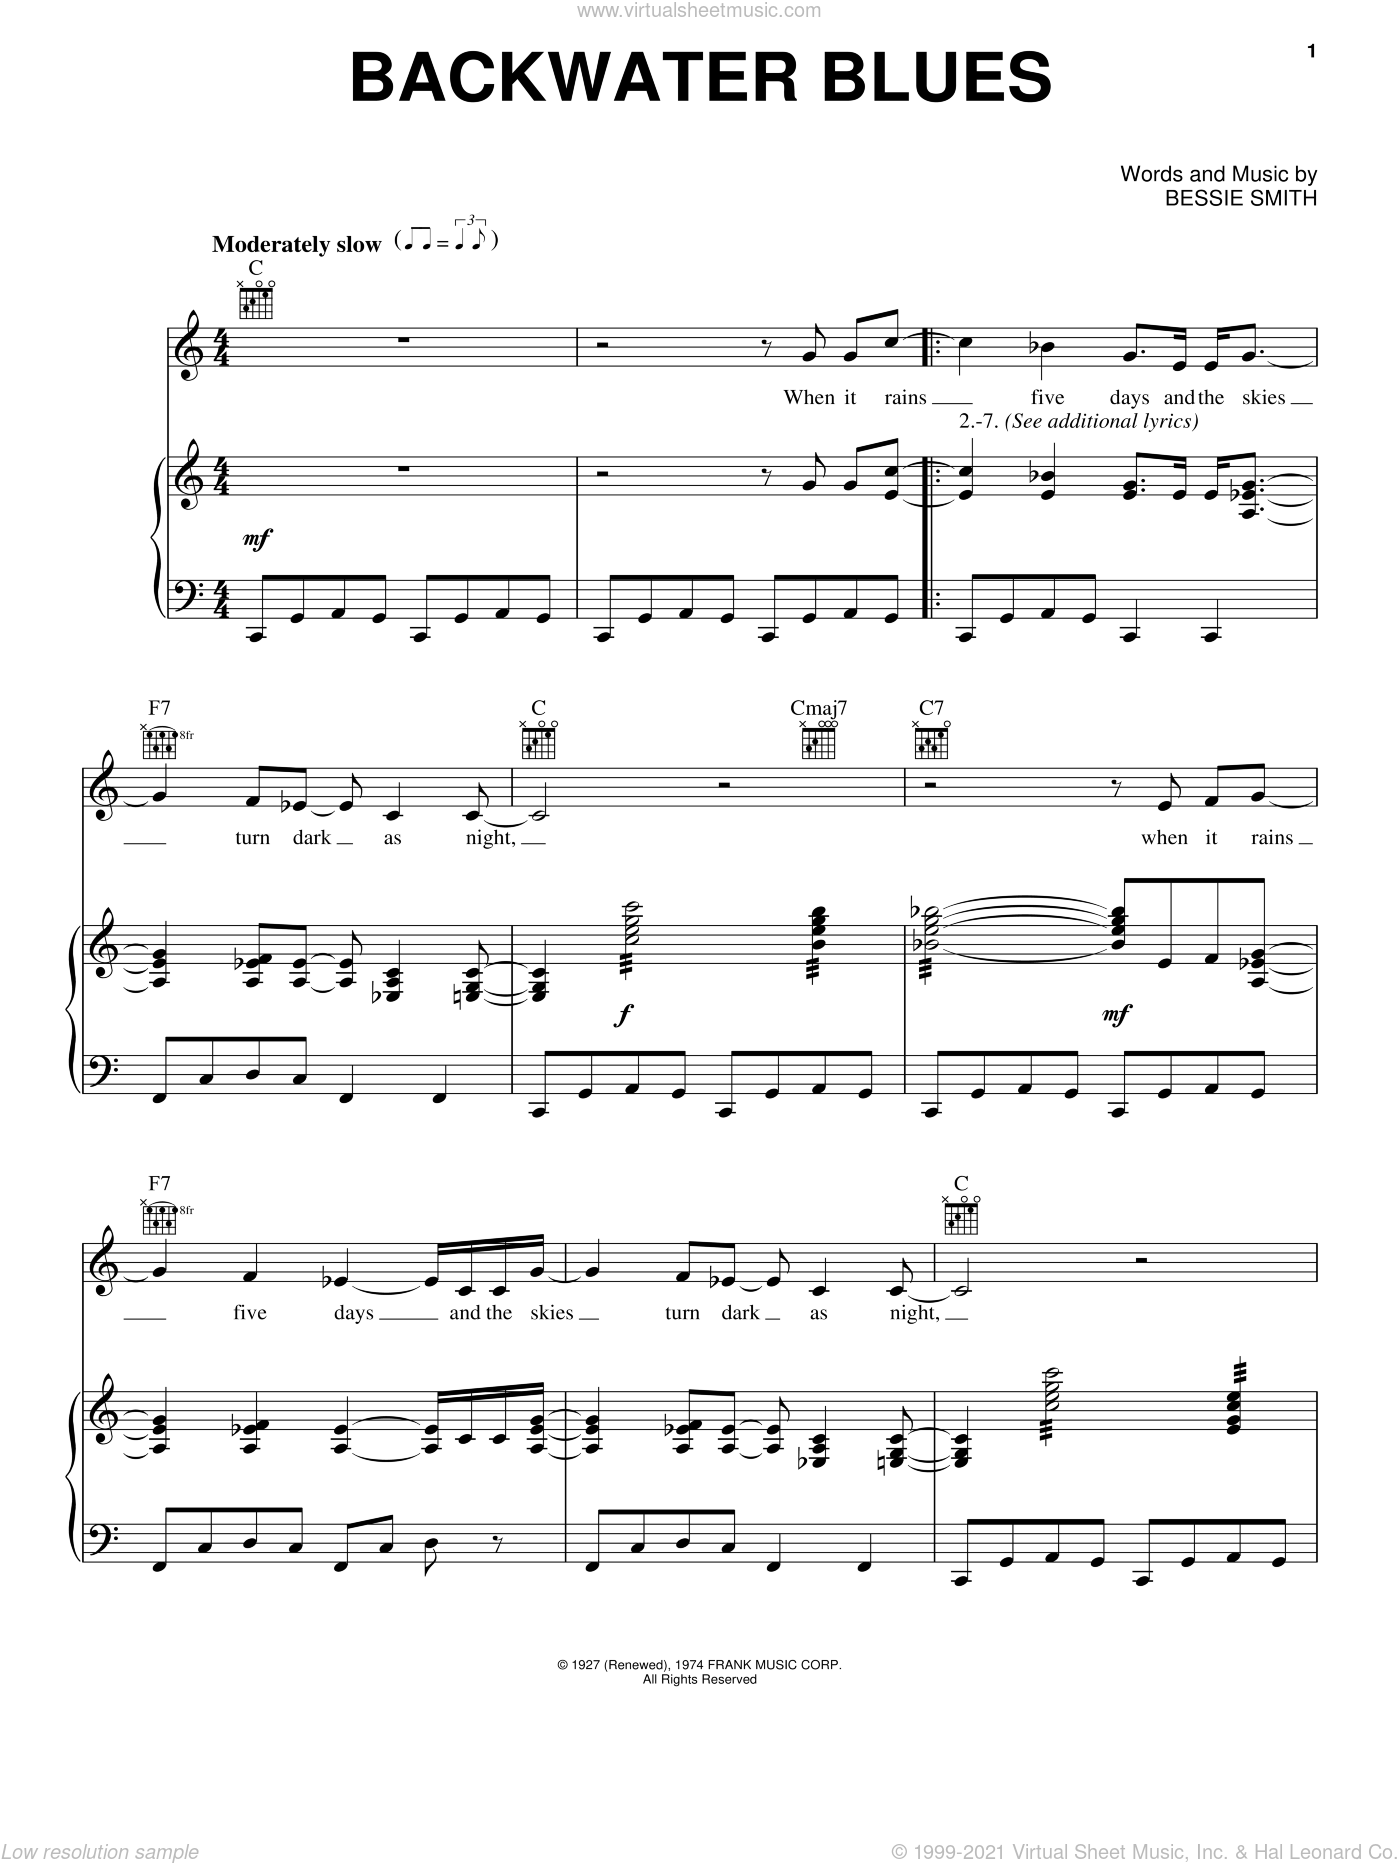 Smith - Backwater Blues sheet music for voice, piano or